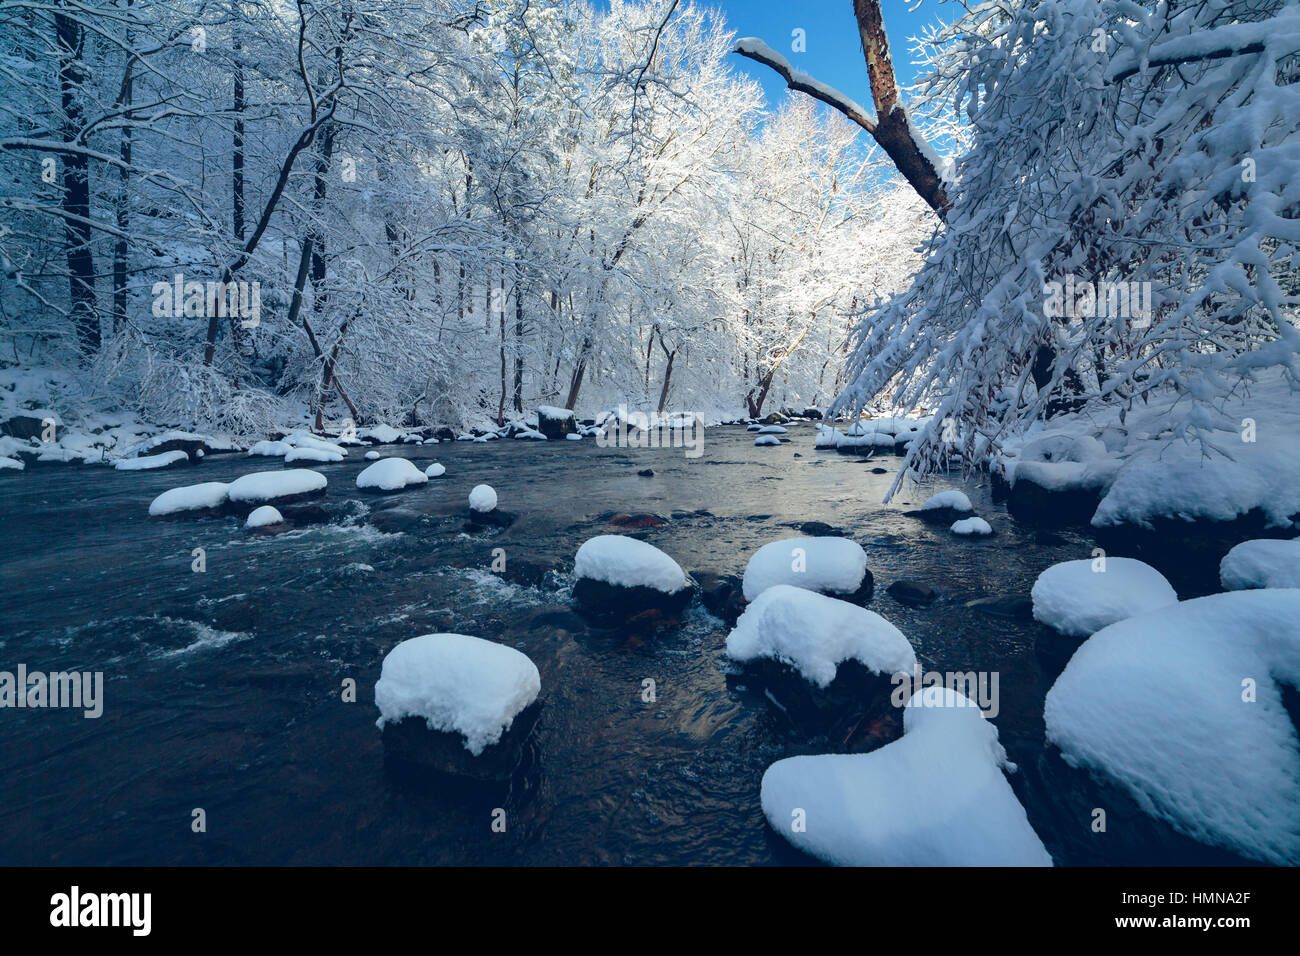 New Jersey, USA. 9th Feb, 2017. Ken Lockwood Gorge covered in snow and ice shortly after Winter Storm Niko dissipated. Credit: Jimmy Kastner/Alamy Live News Stock Photo